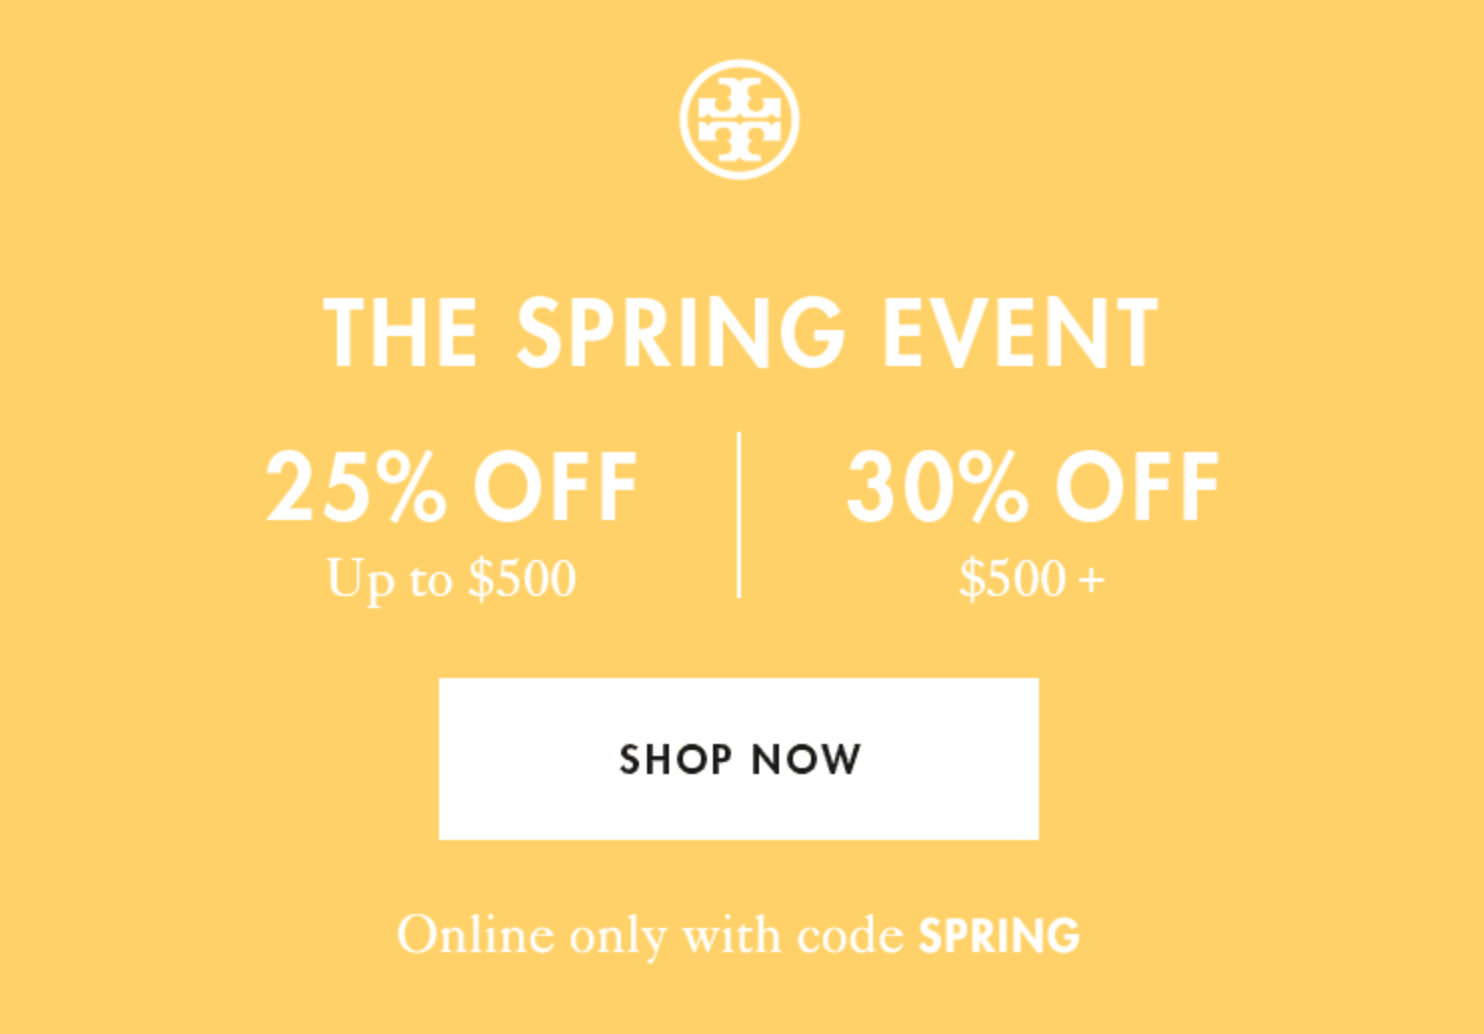 Tory Burch Spring Event 2019  Save Up To 30% Off! - The Double Take Girls